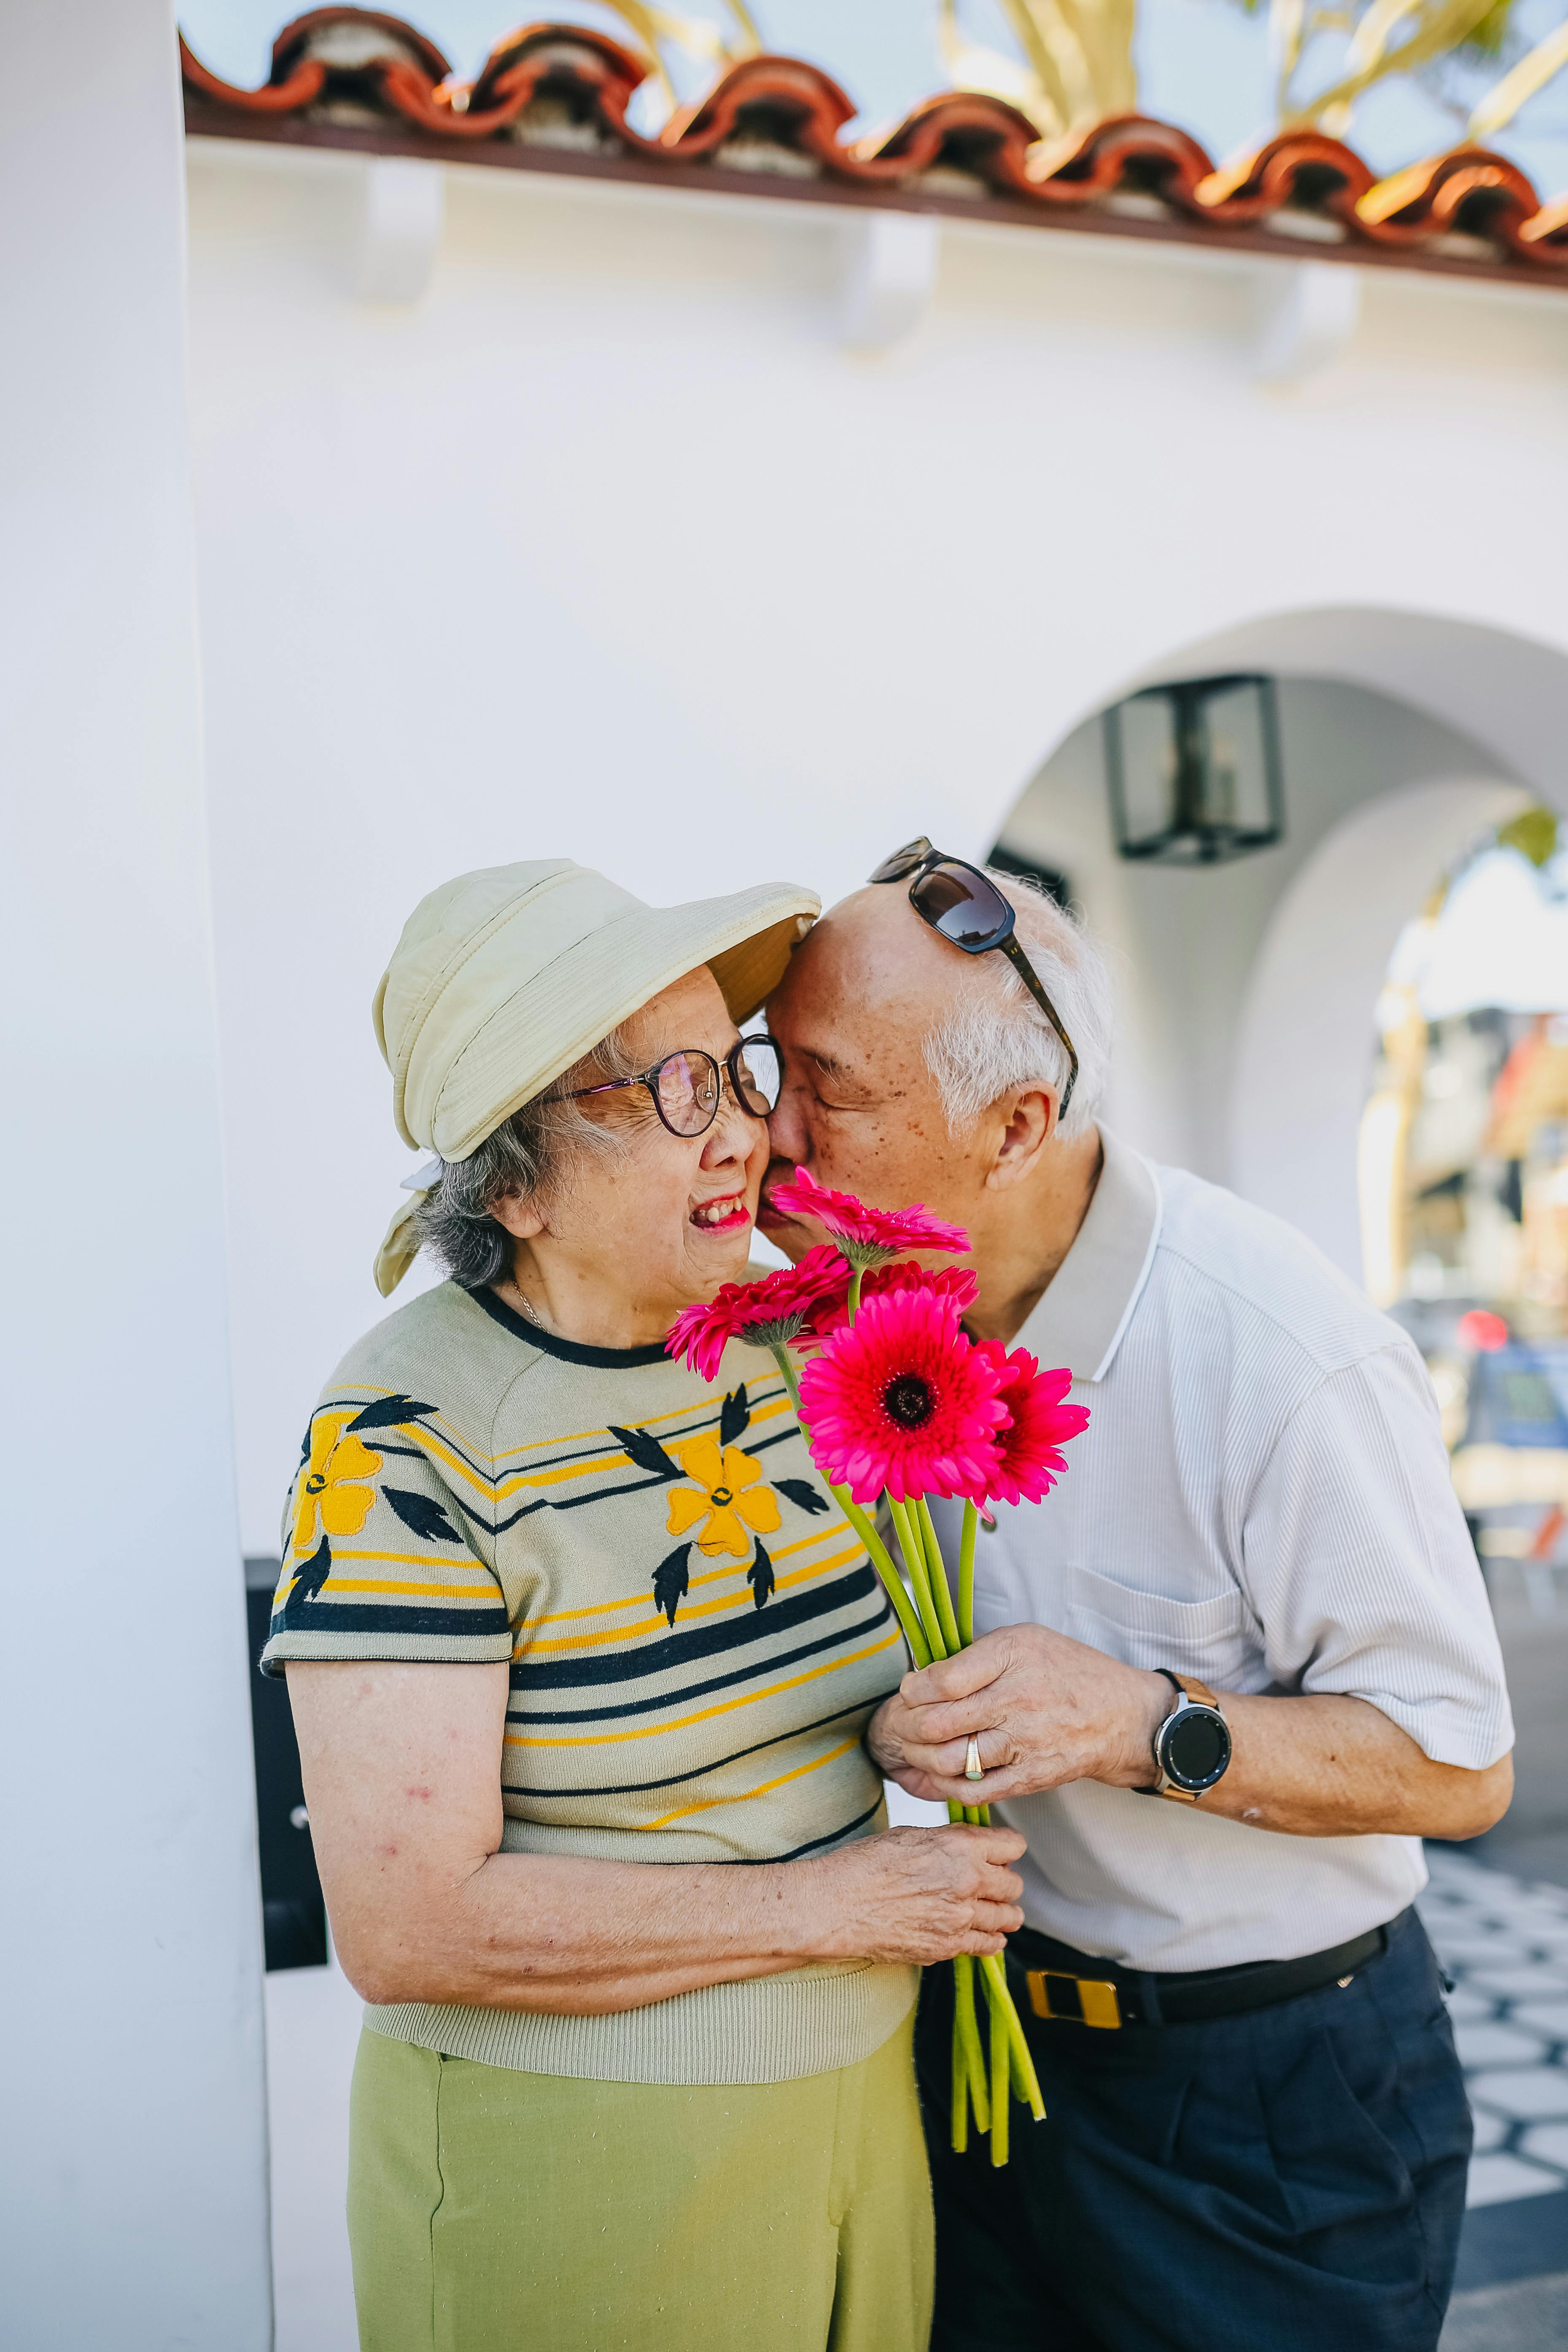 A couple being romantic while the woman receives a bouquet of flowers | Source: Pexels